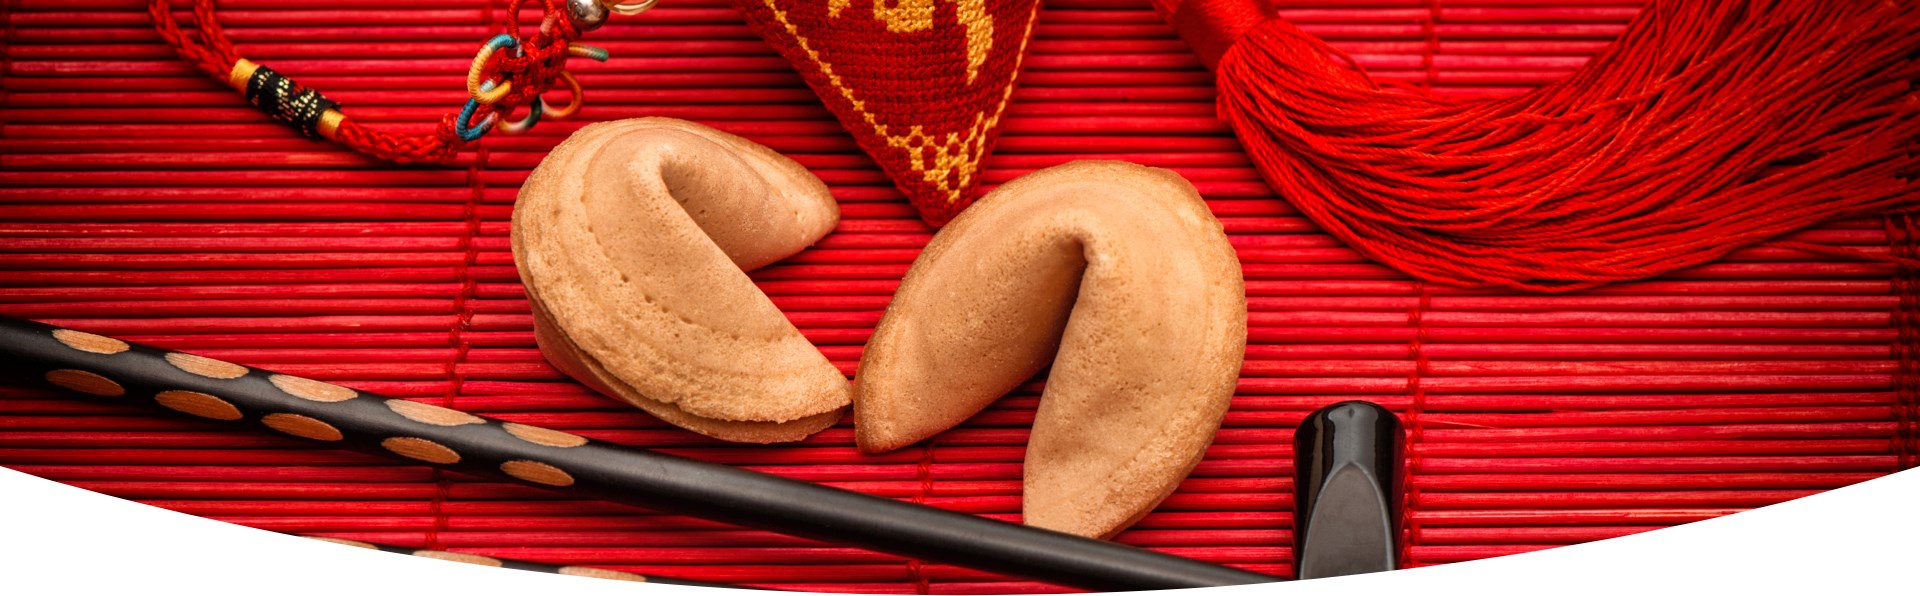 2 fortune cookies with an Asian decoration in red